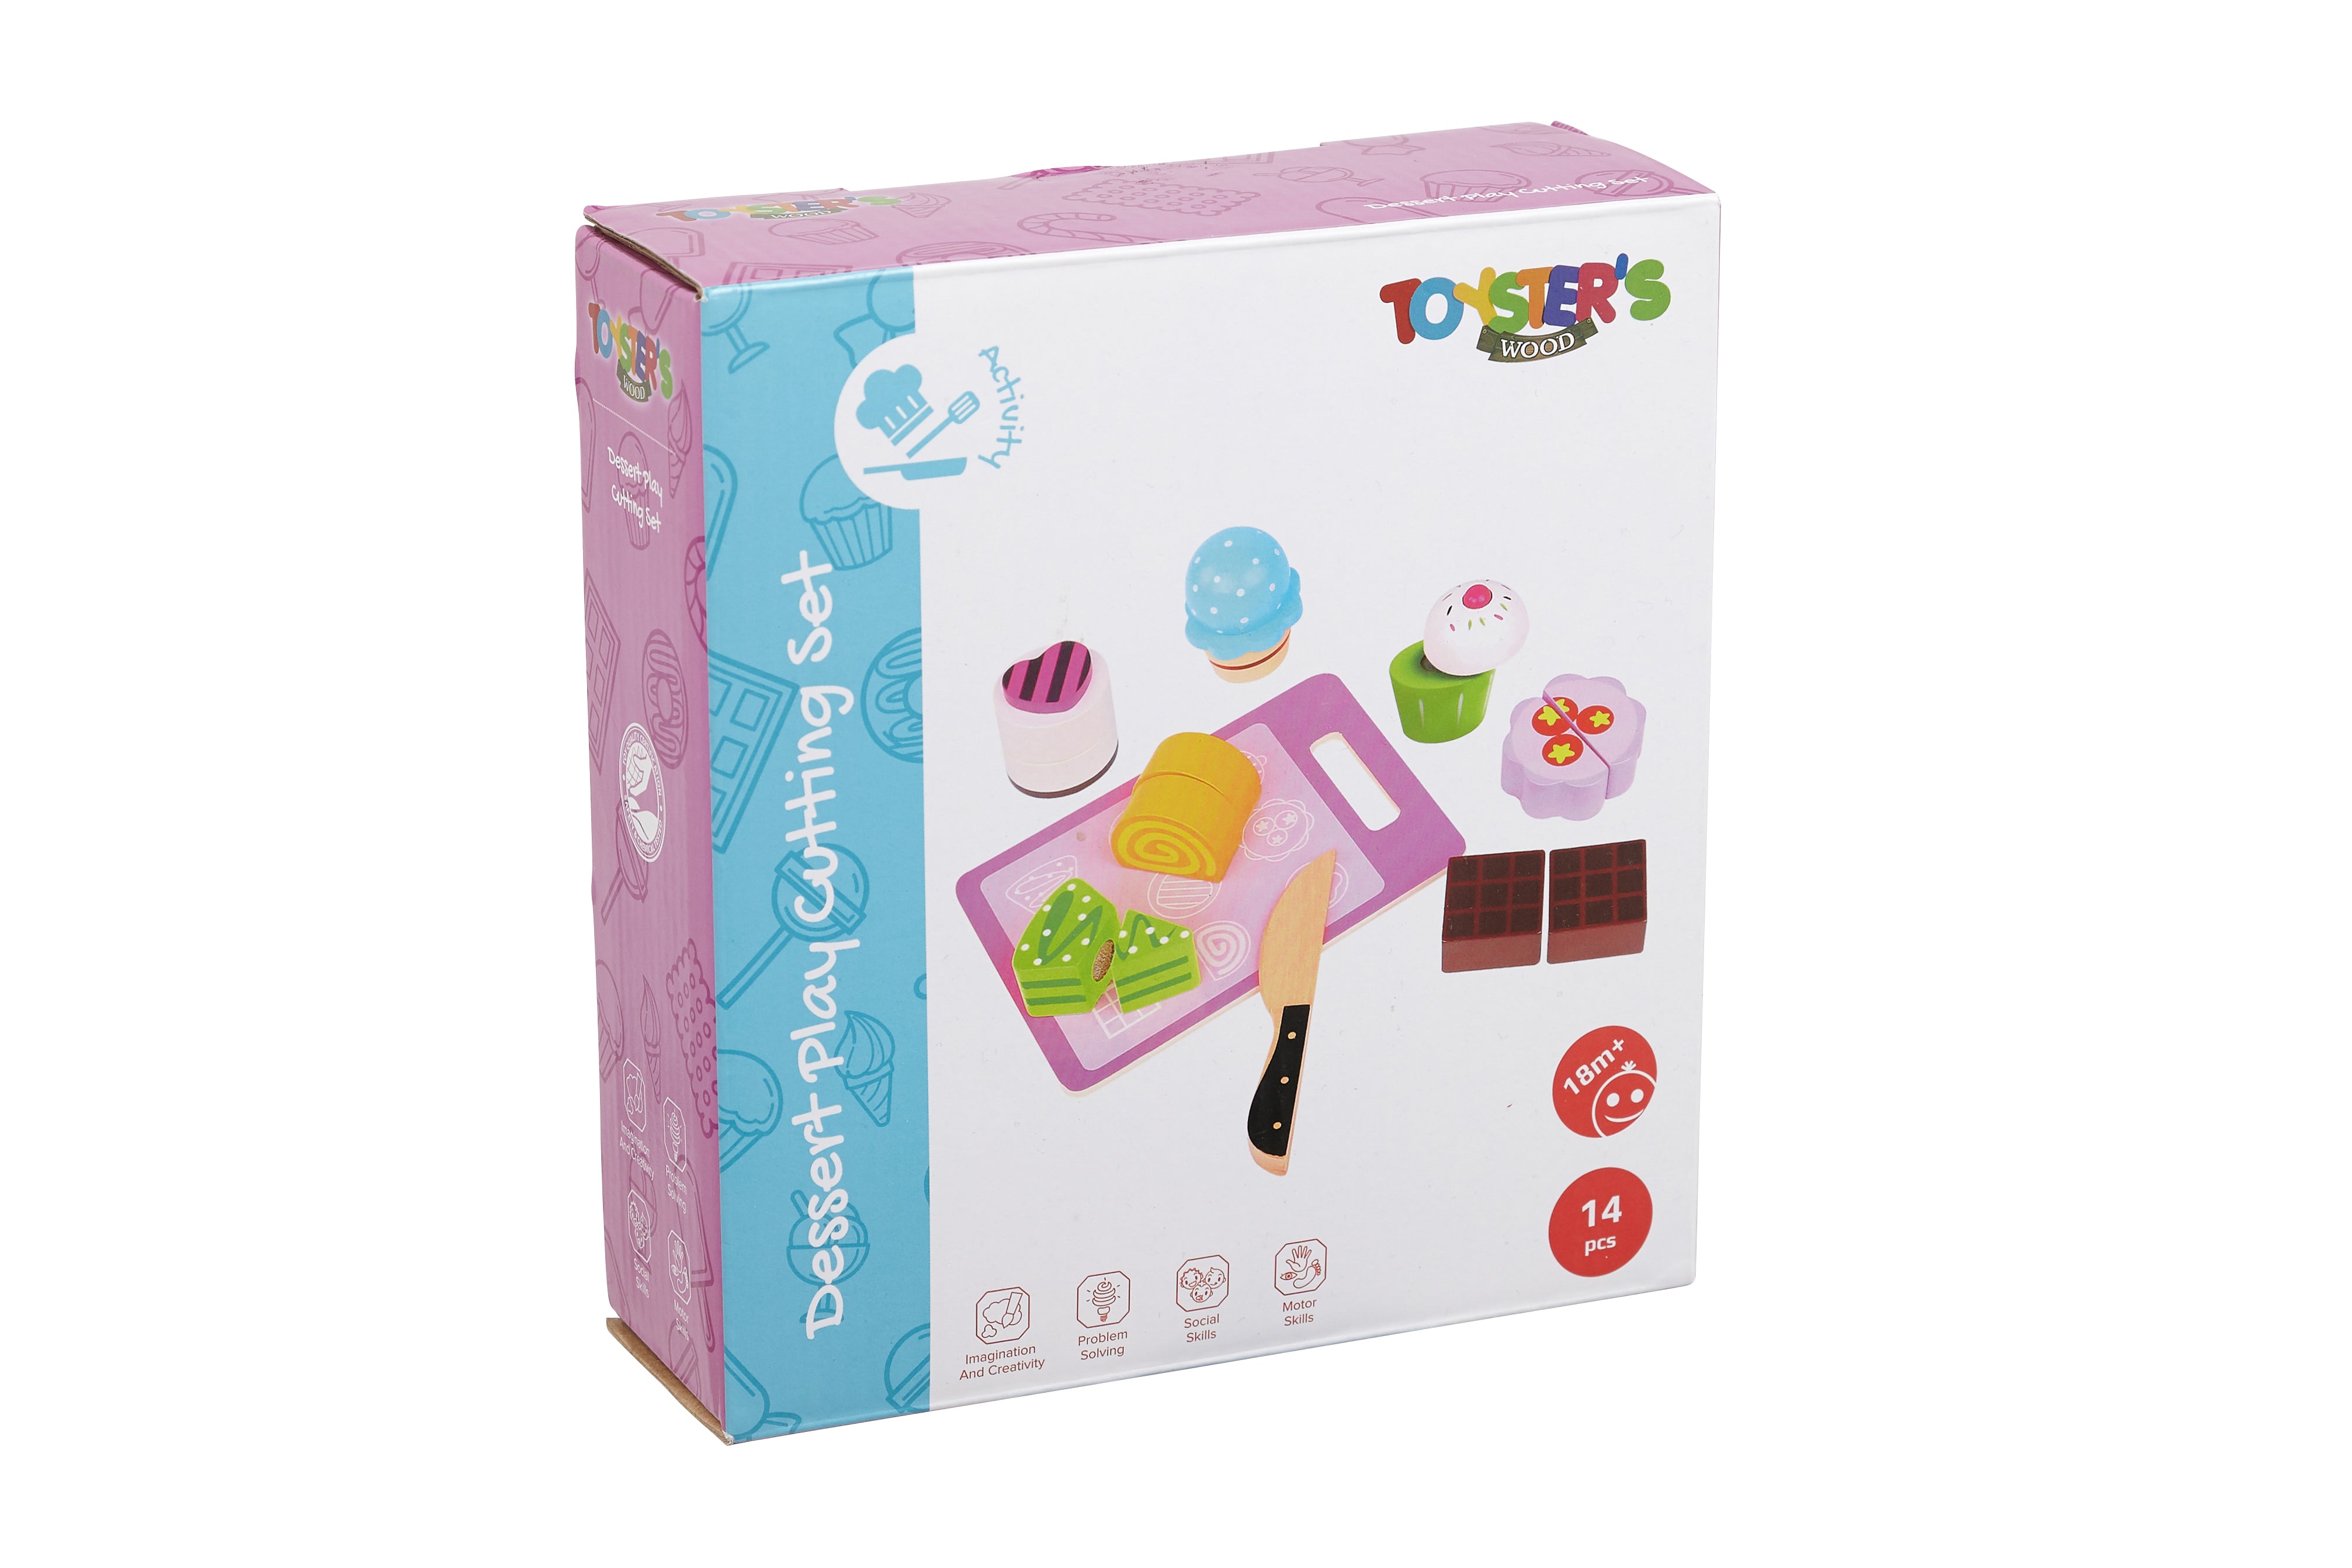 Toysters Wooden Dessert Play Food Cutting Set